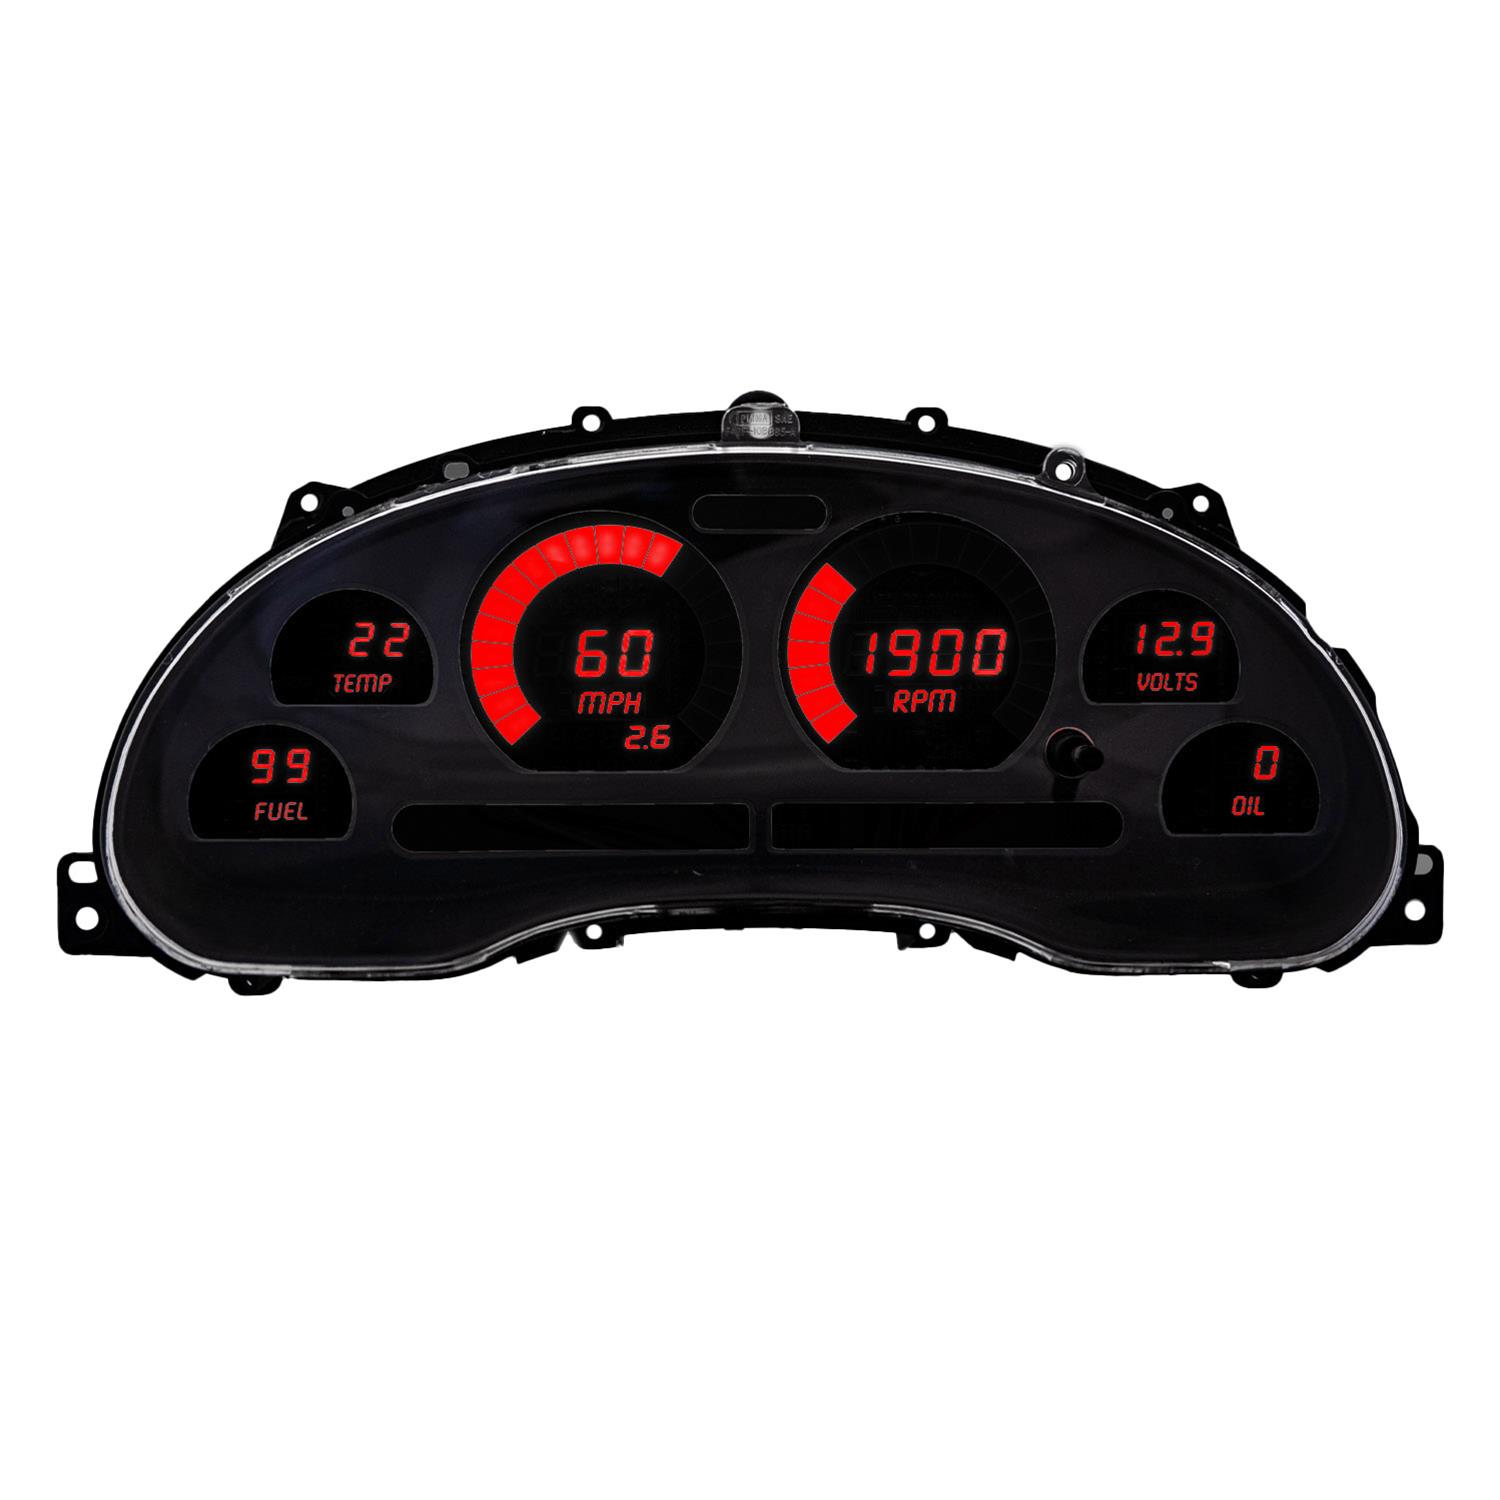 LED Direct Replacement Digital Bargraph Dash Kits for